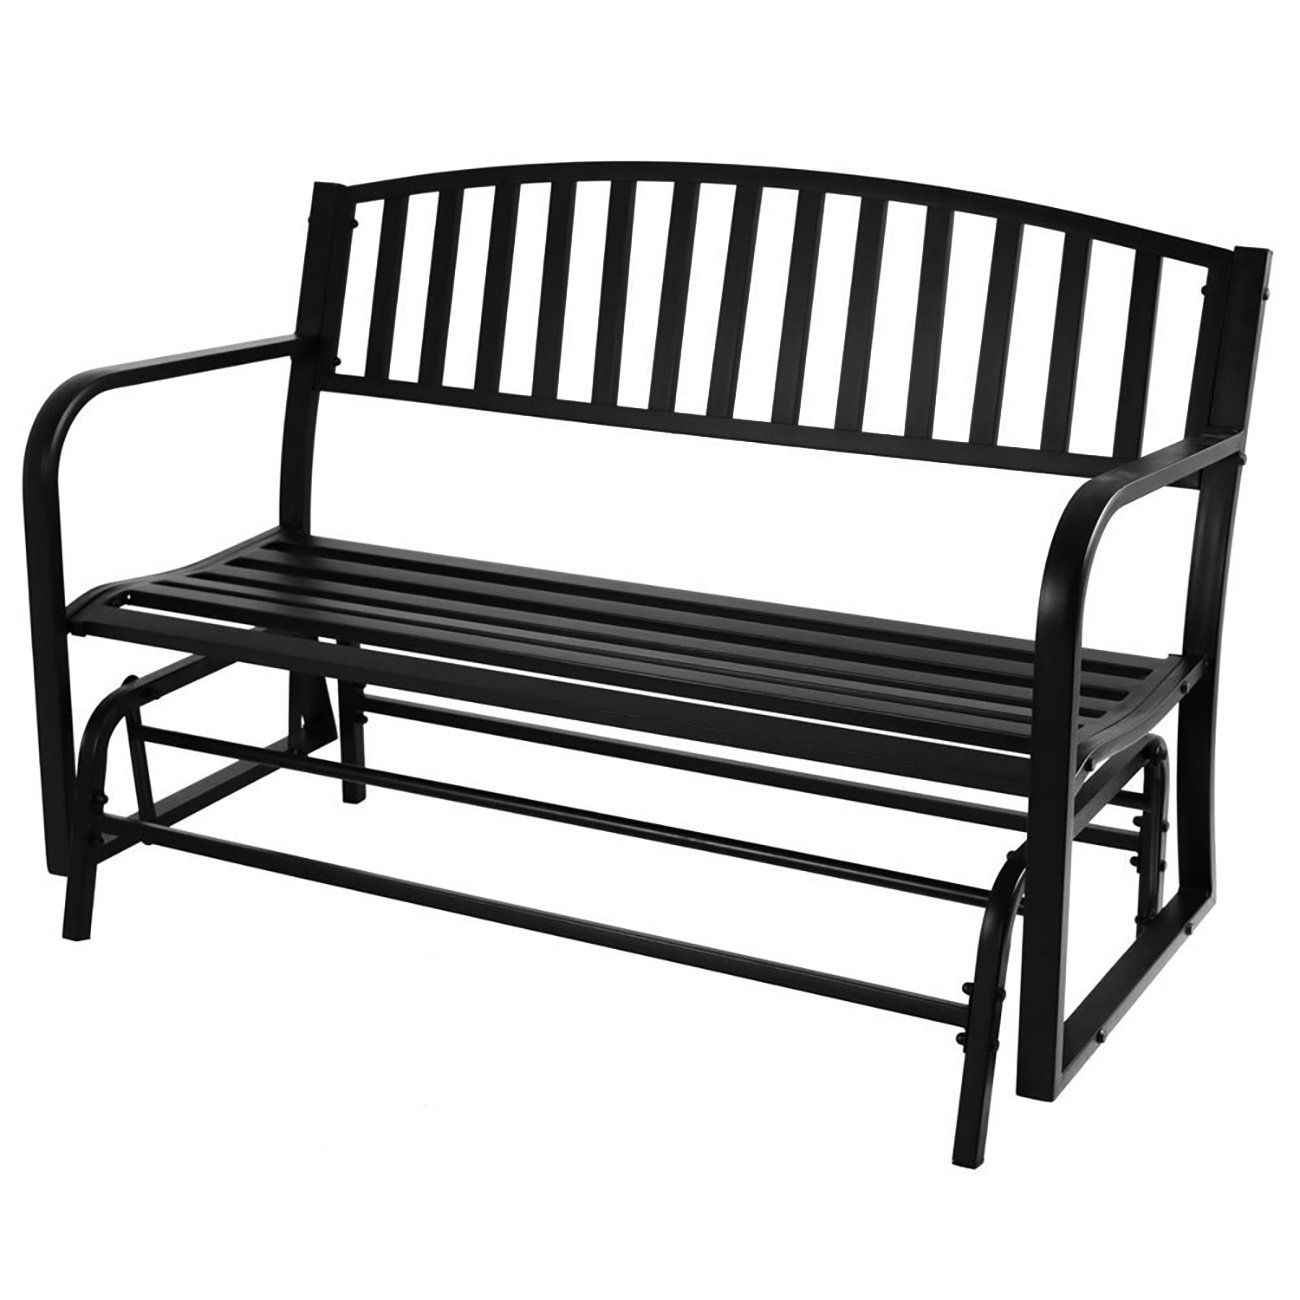 Cheap Patio Furniture Glider Bench, Find Patio Furniture With Rocking Love Seats Glider Swing Benches With Sturdy Frame (View 7 of 25)